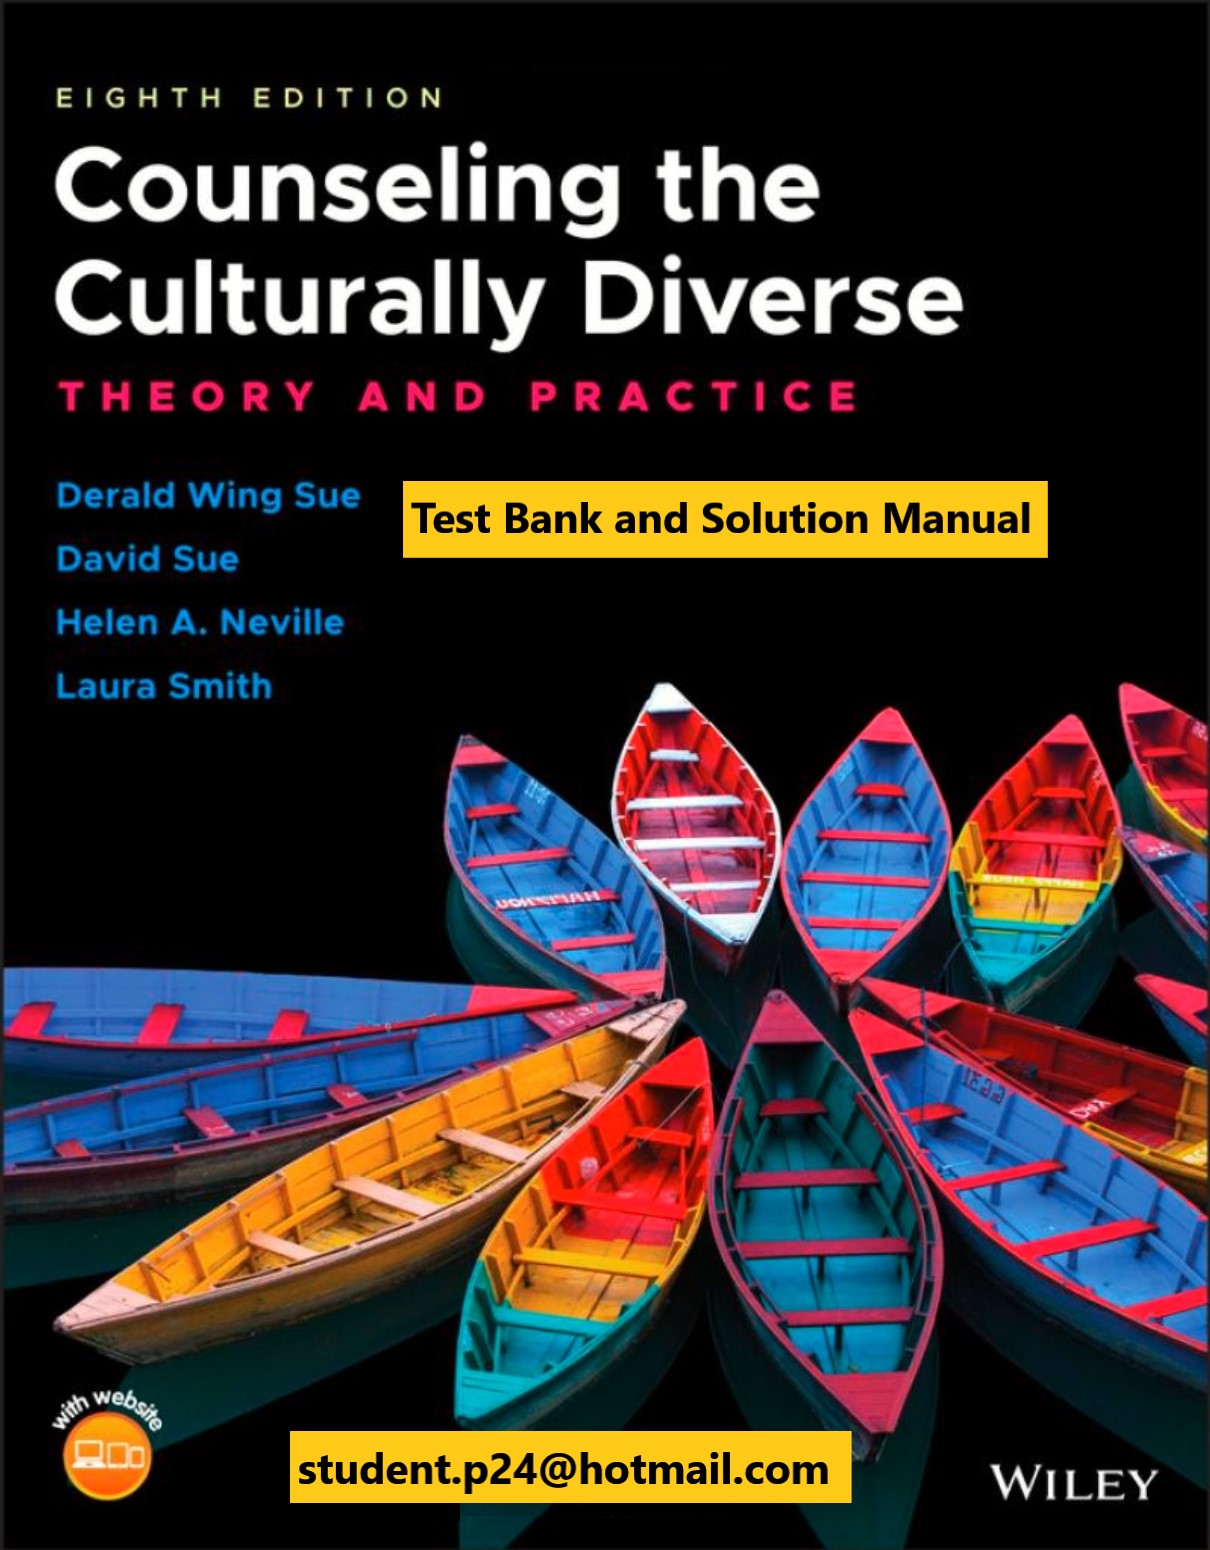 Counseling the Culturally Diverse Theory and Practice 8th Edition Sue Sue Neville Smith 2019 Solution Manual Test Bank 3